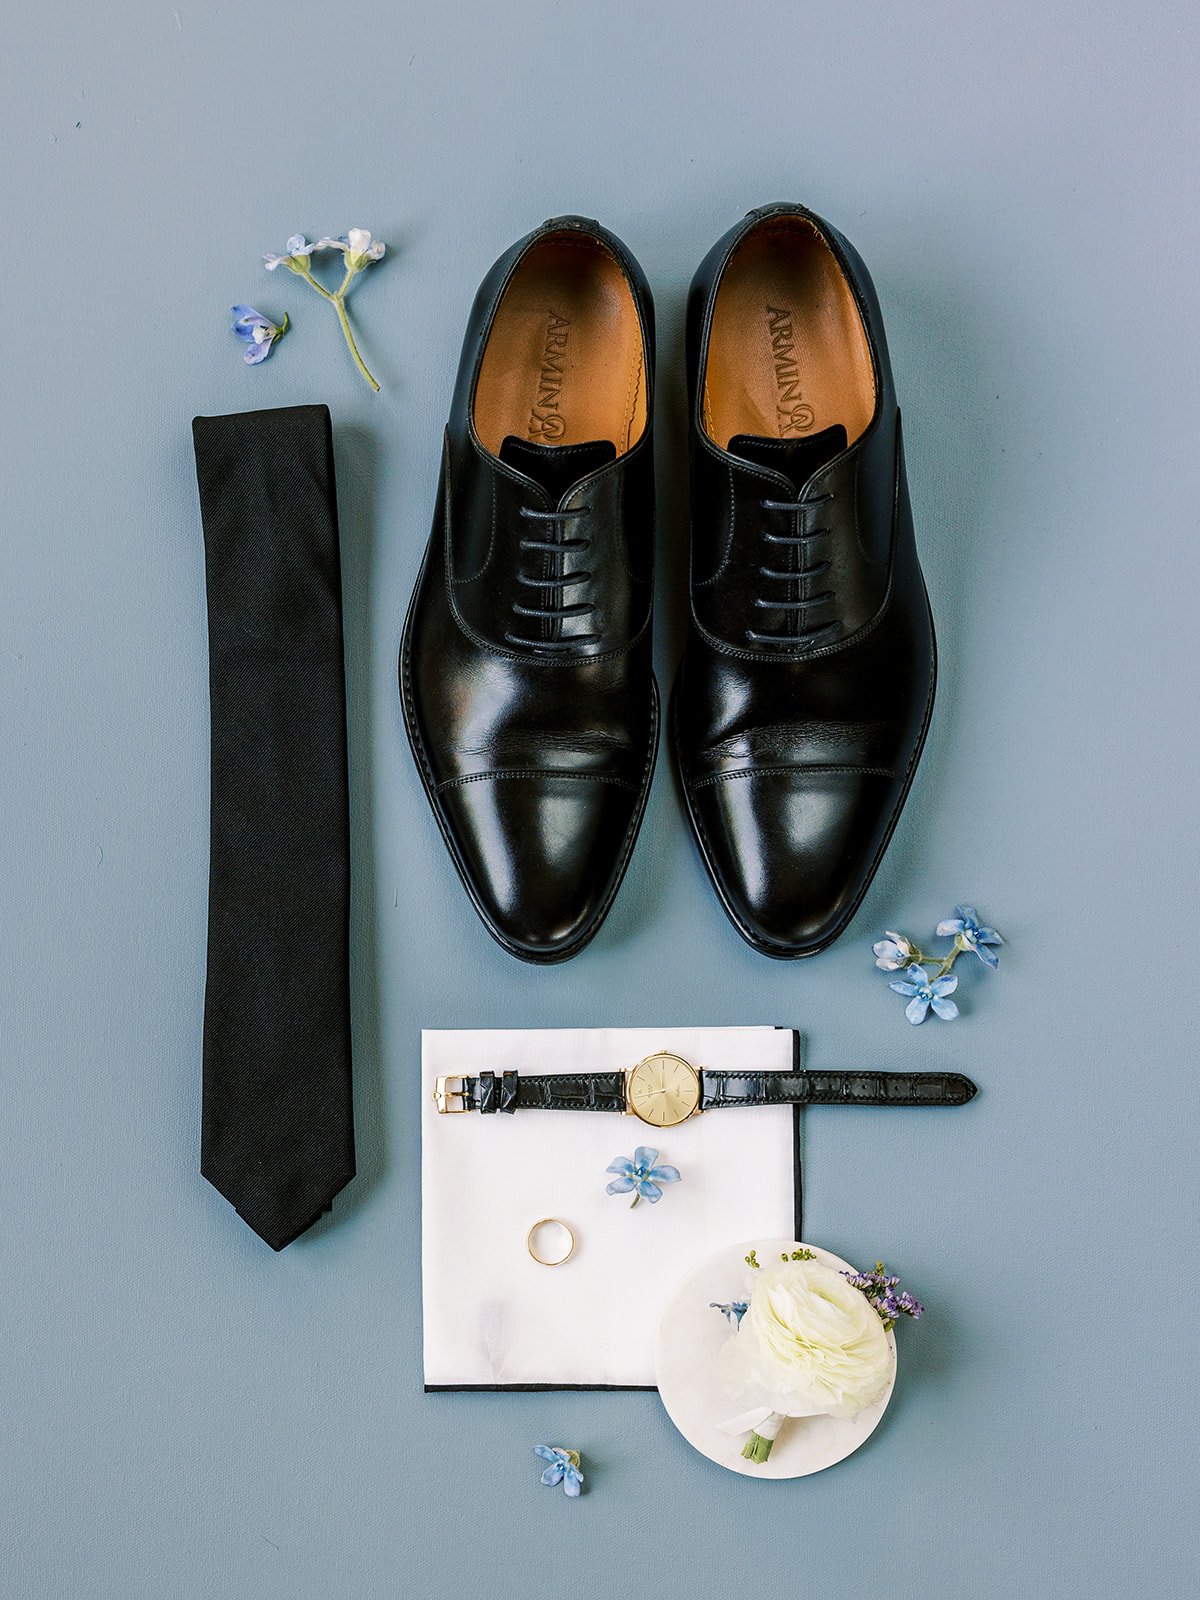 Groomsmen details styled by Shannon rose events on a blue backdrop